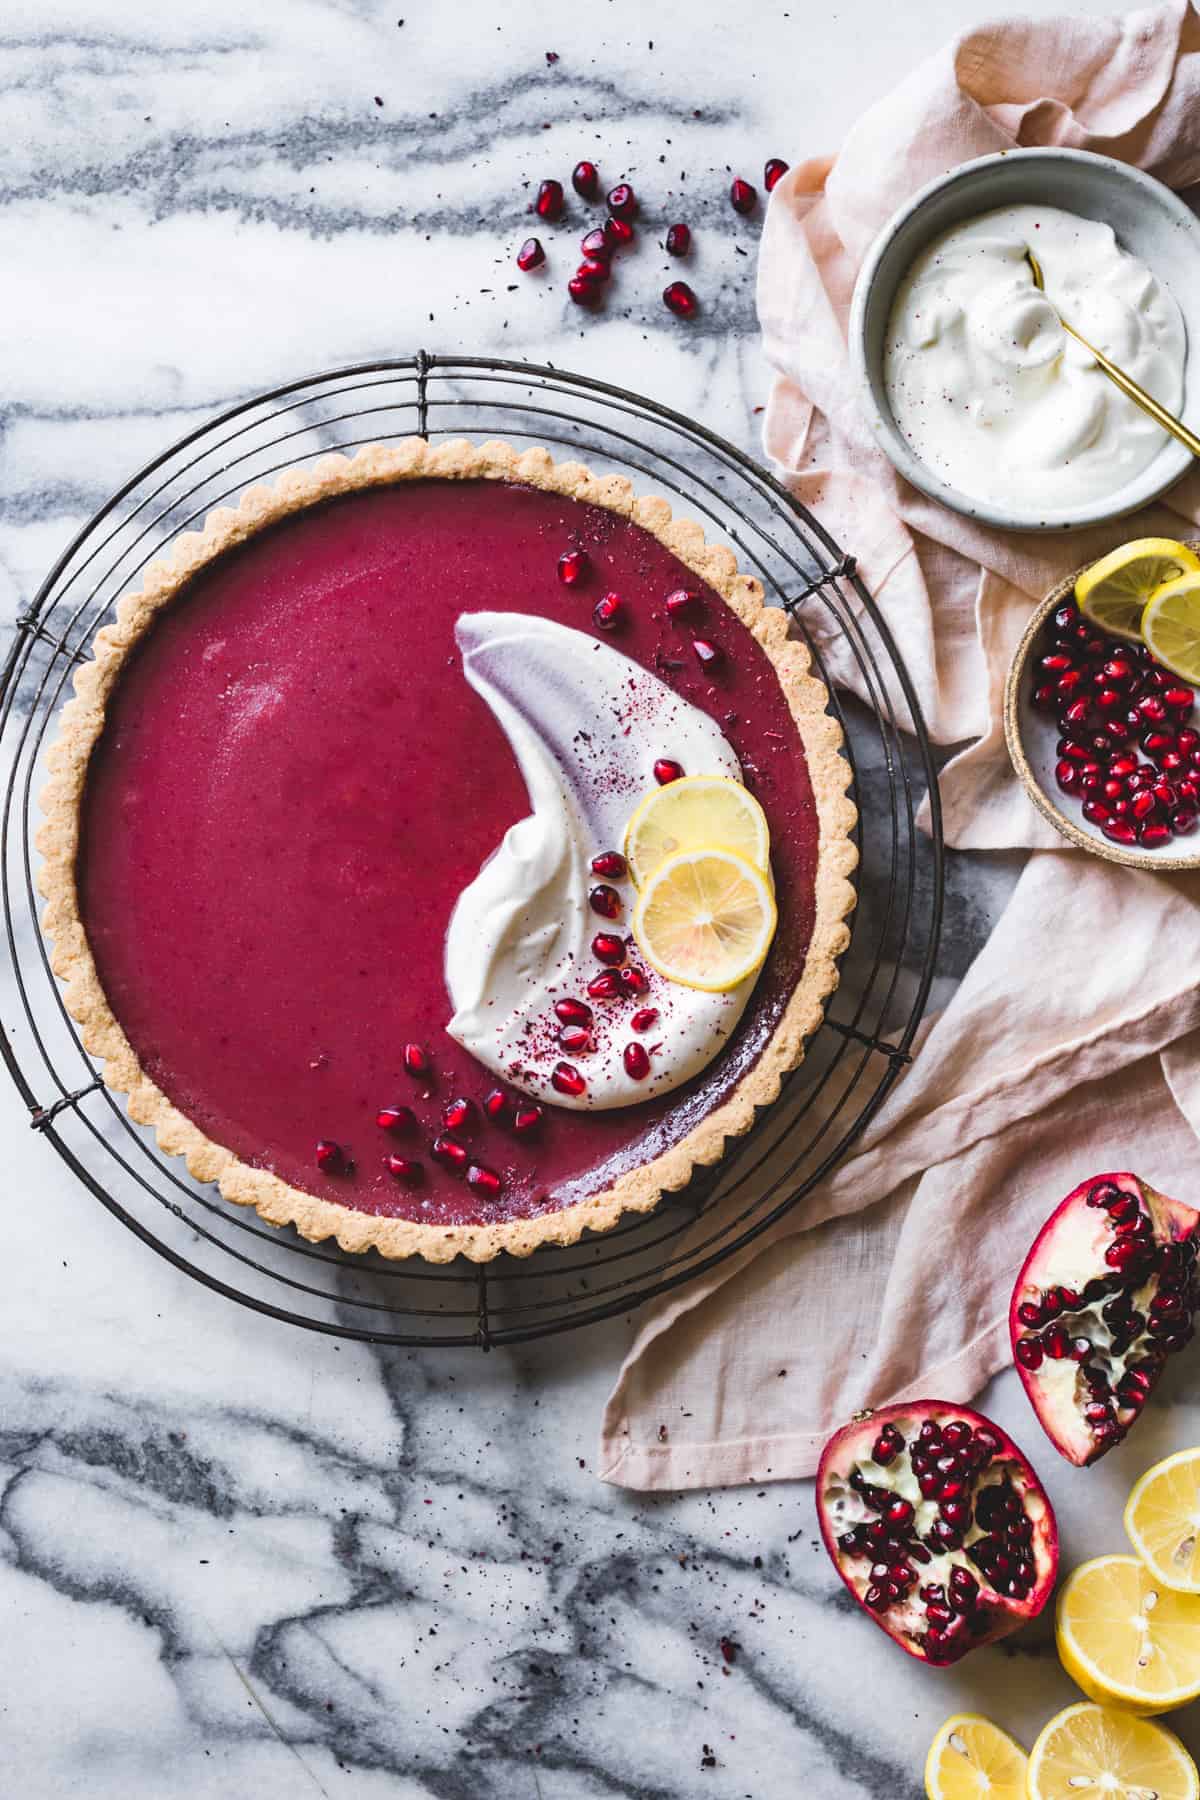 delicious Pomegranate Tart with Hibiscus, Lemon, and Almond Flour Crust {gluten-free}